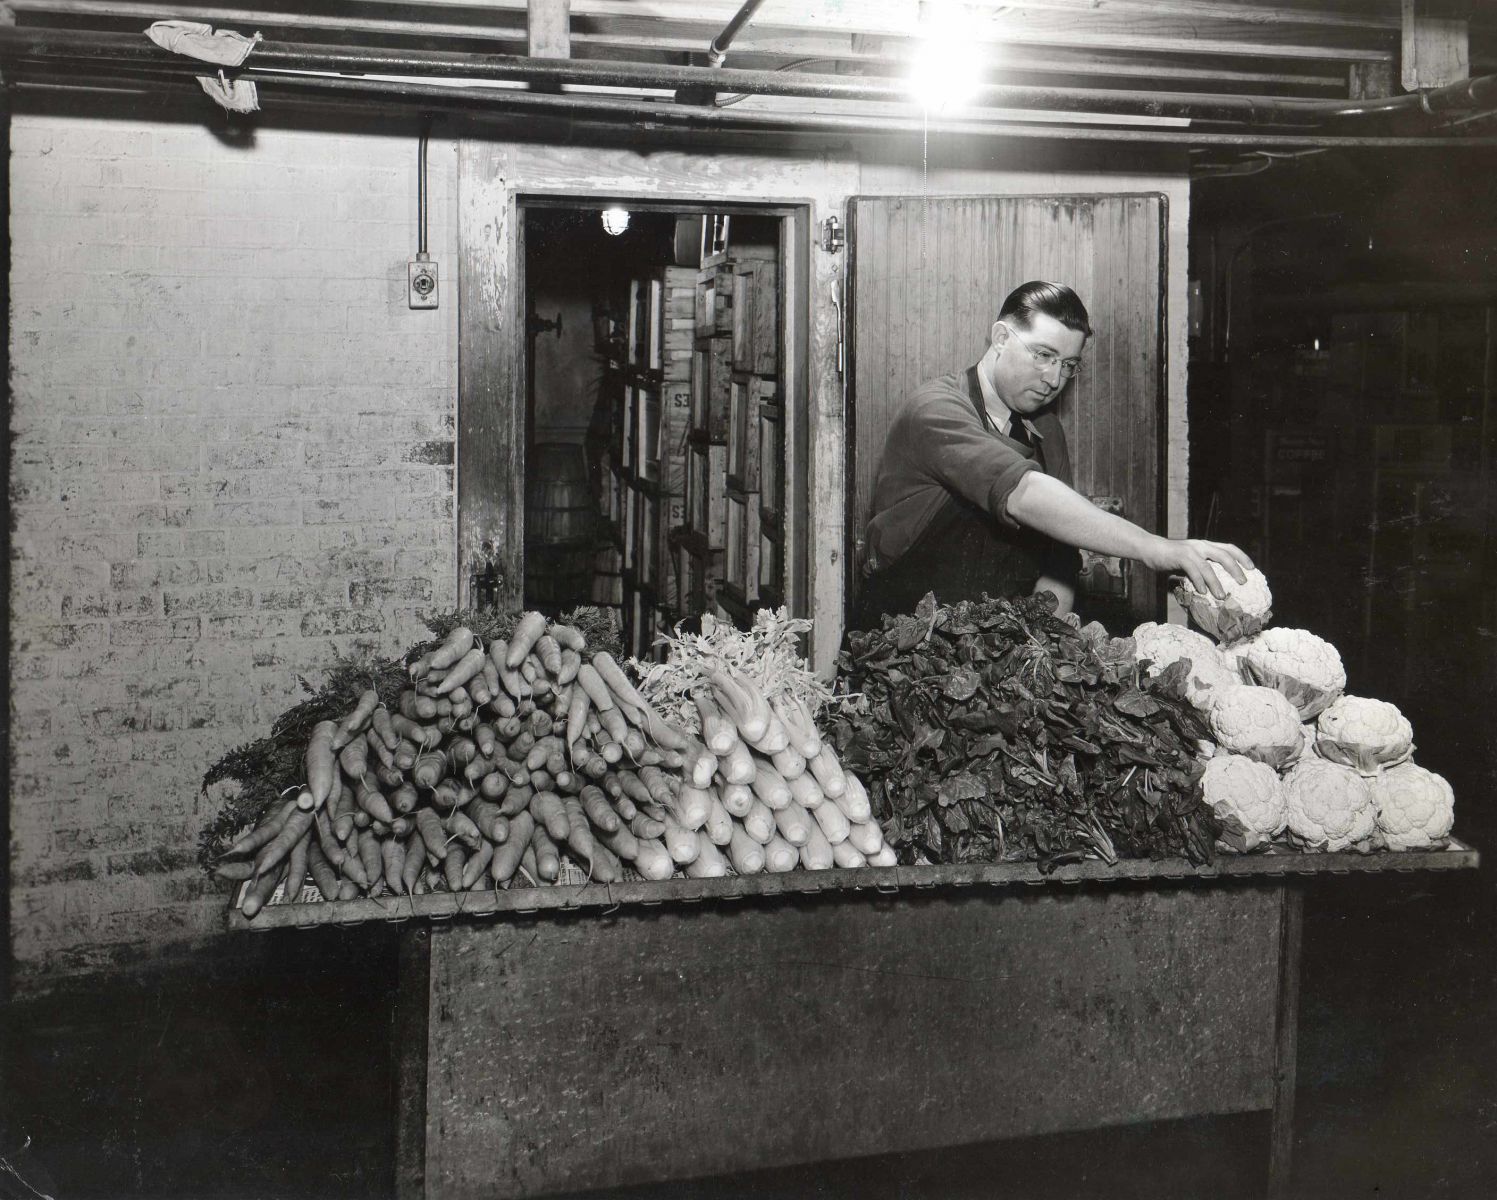 Phot of Paul's Food Shoppe in 1930